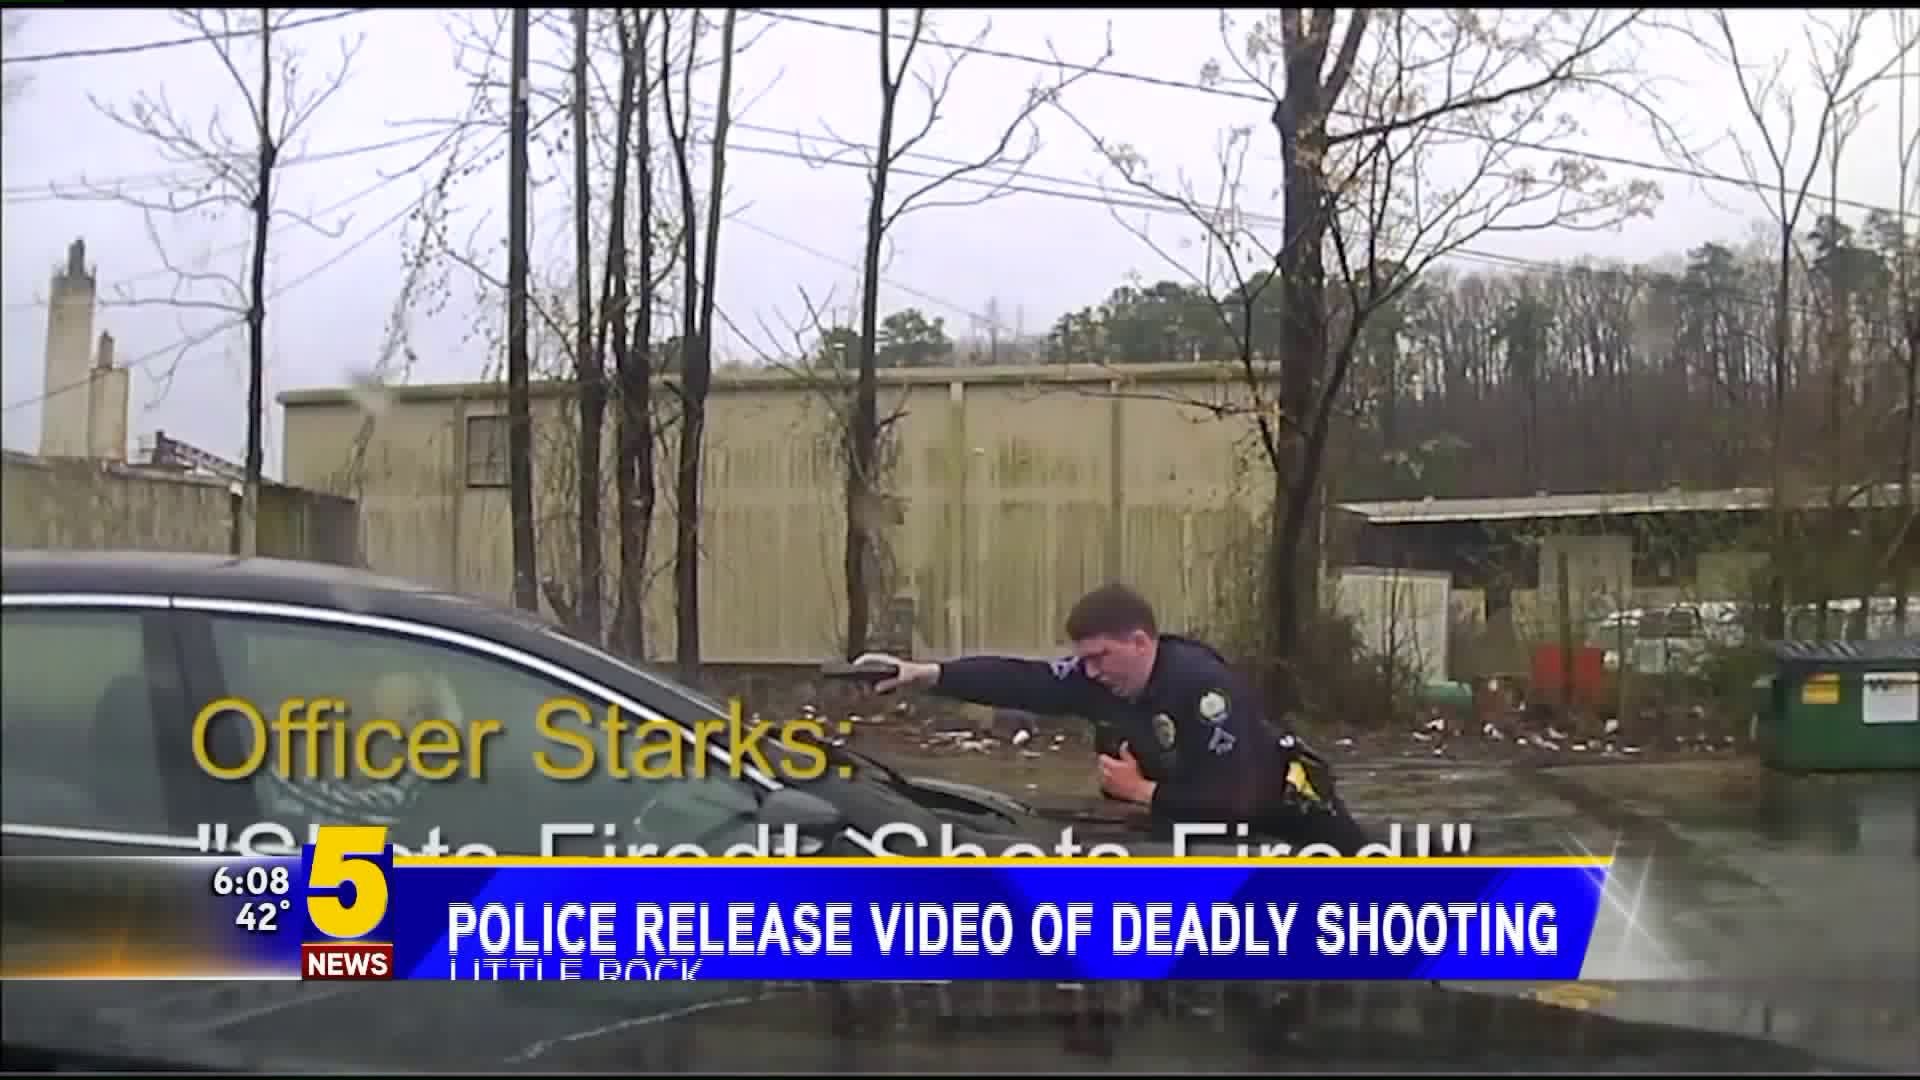 Police Release Video of Deadly Little Rock Shooting